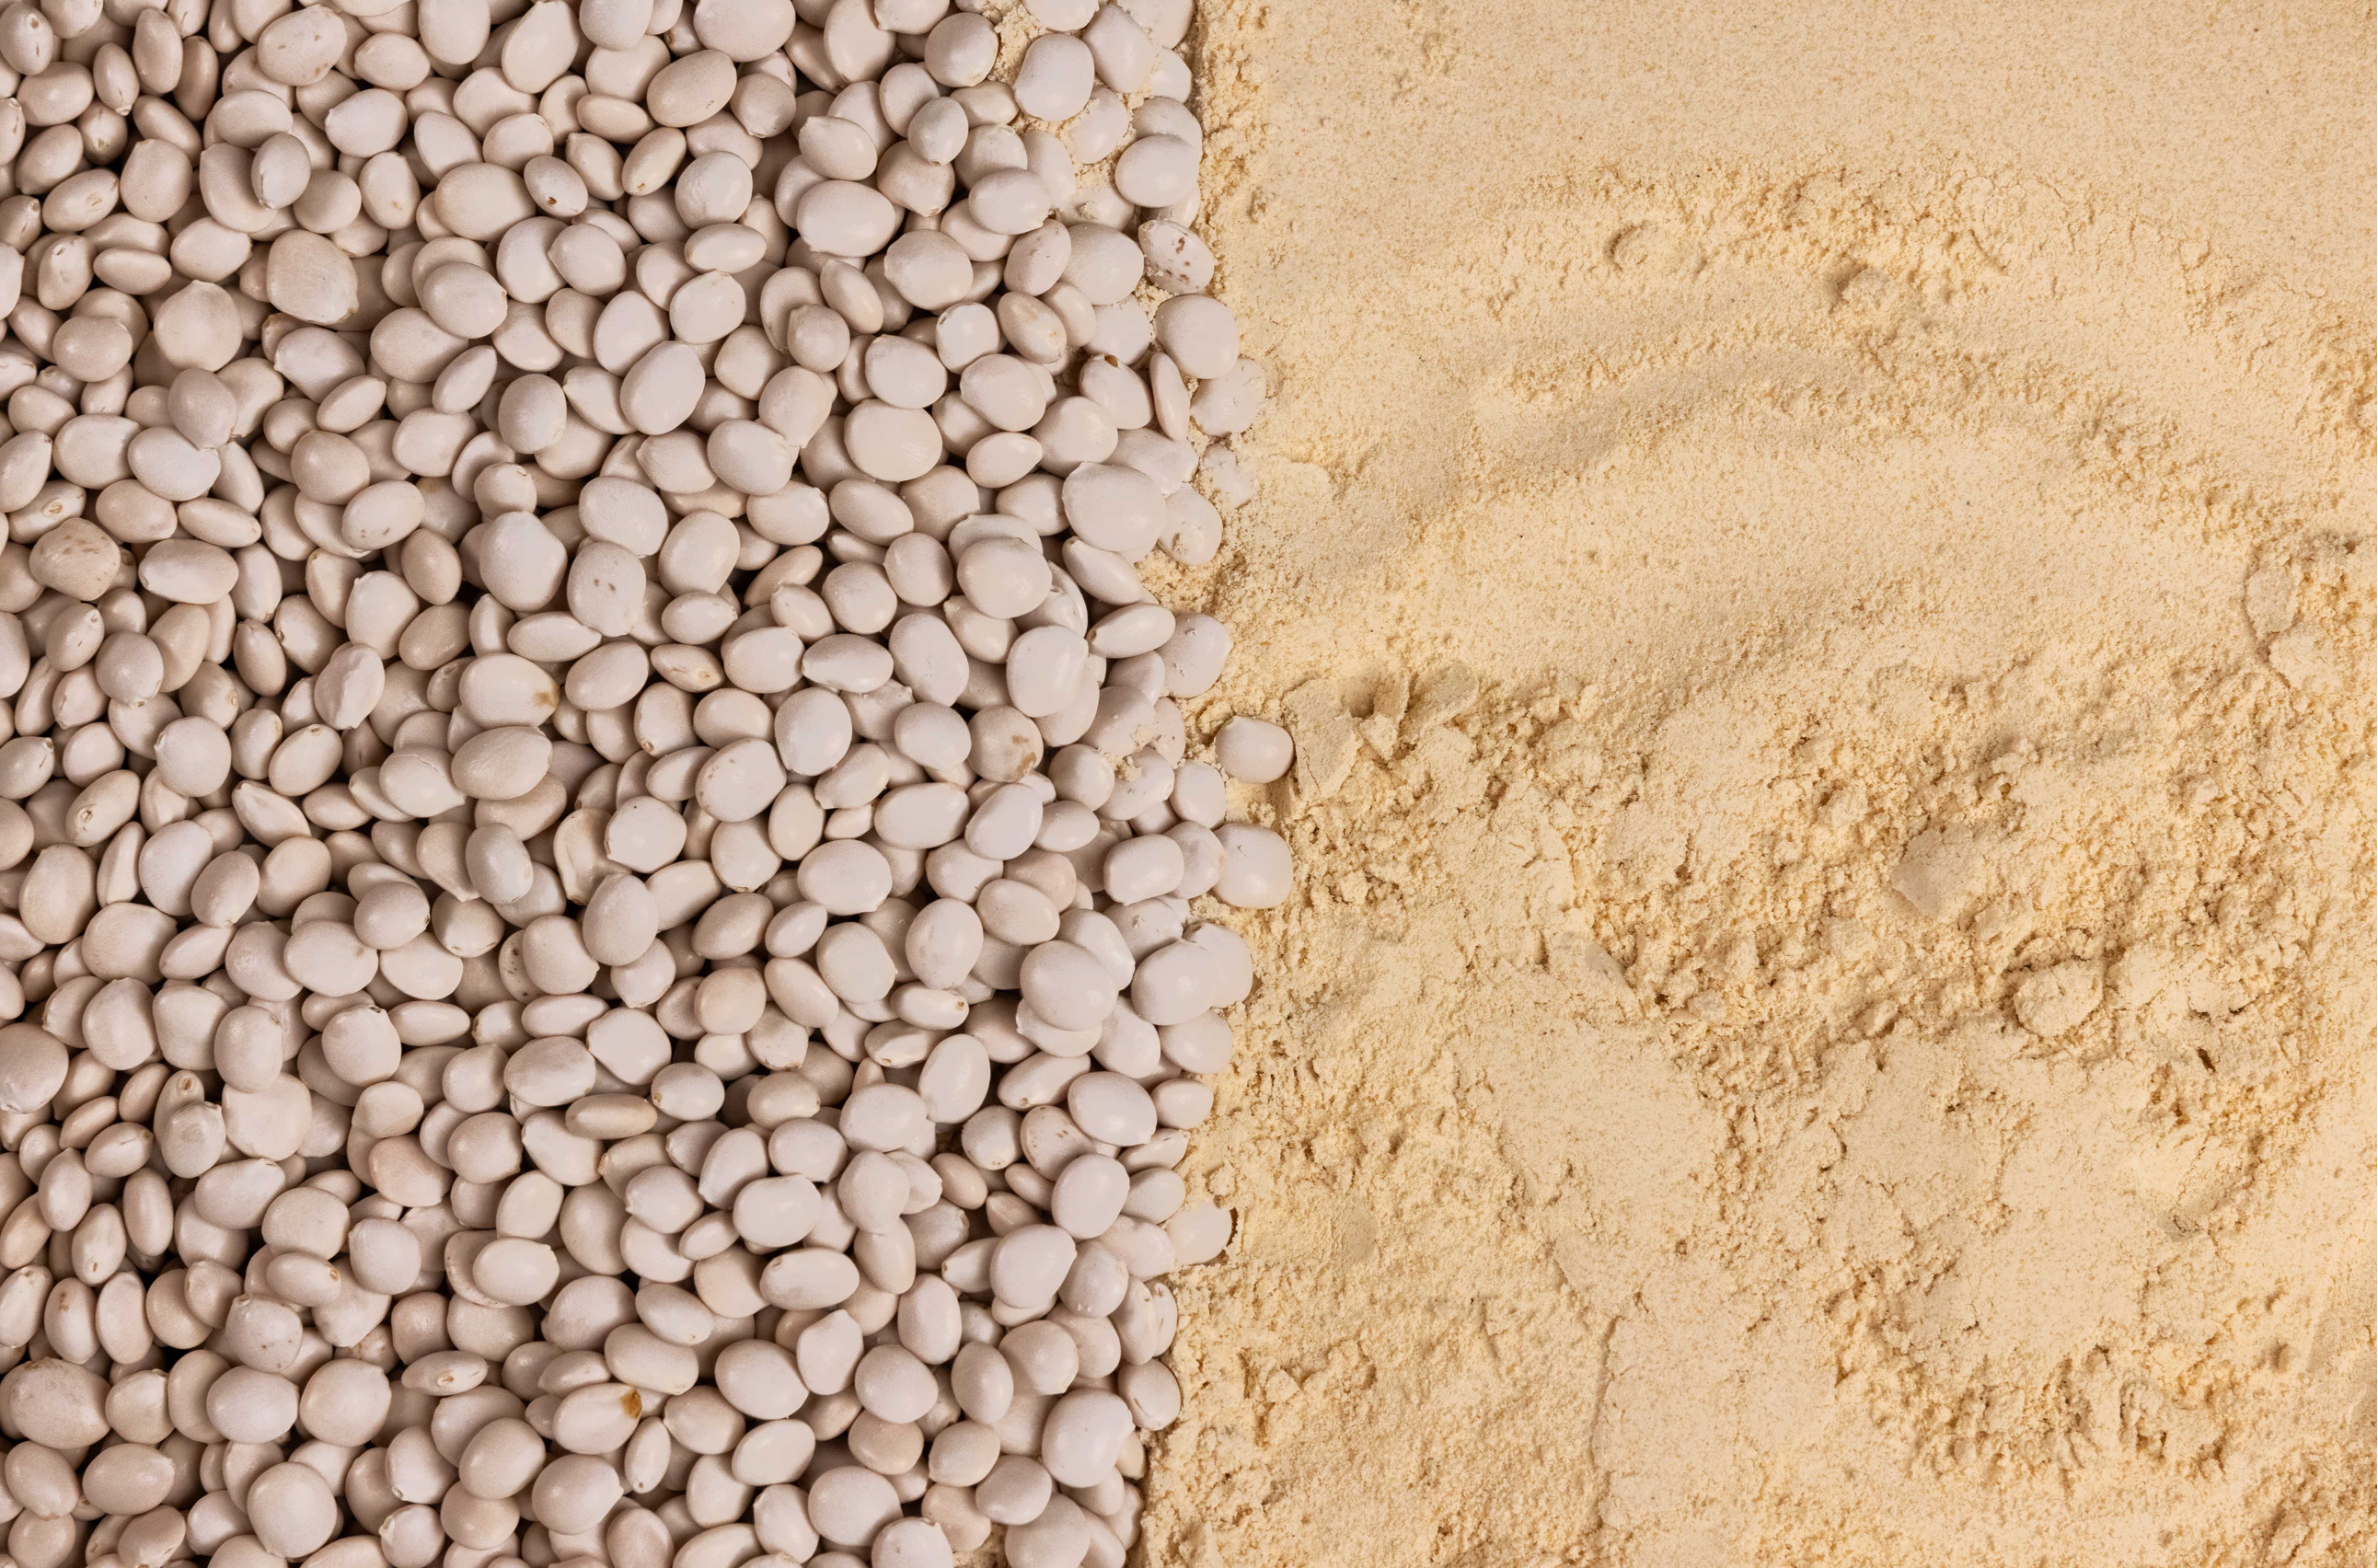 Why do plant proteins bloat you?